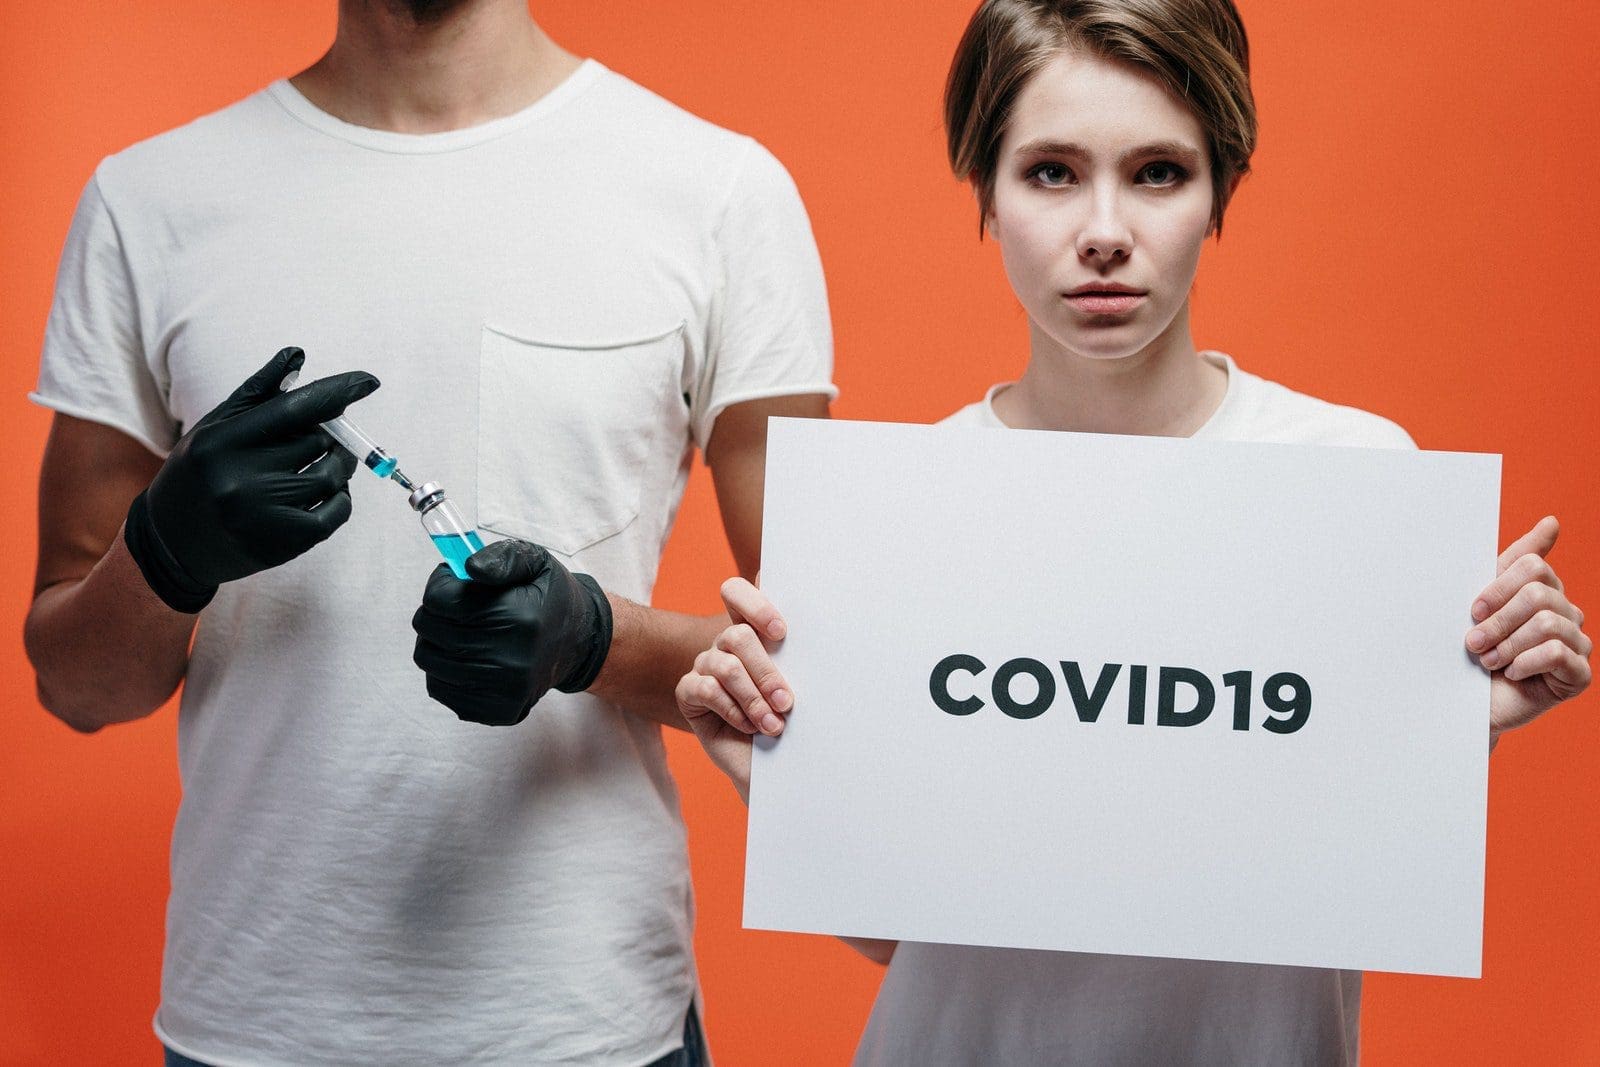 Nanobodies Man Holding A Vaccine With Woman Holding A Covid19 Poster